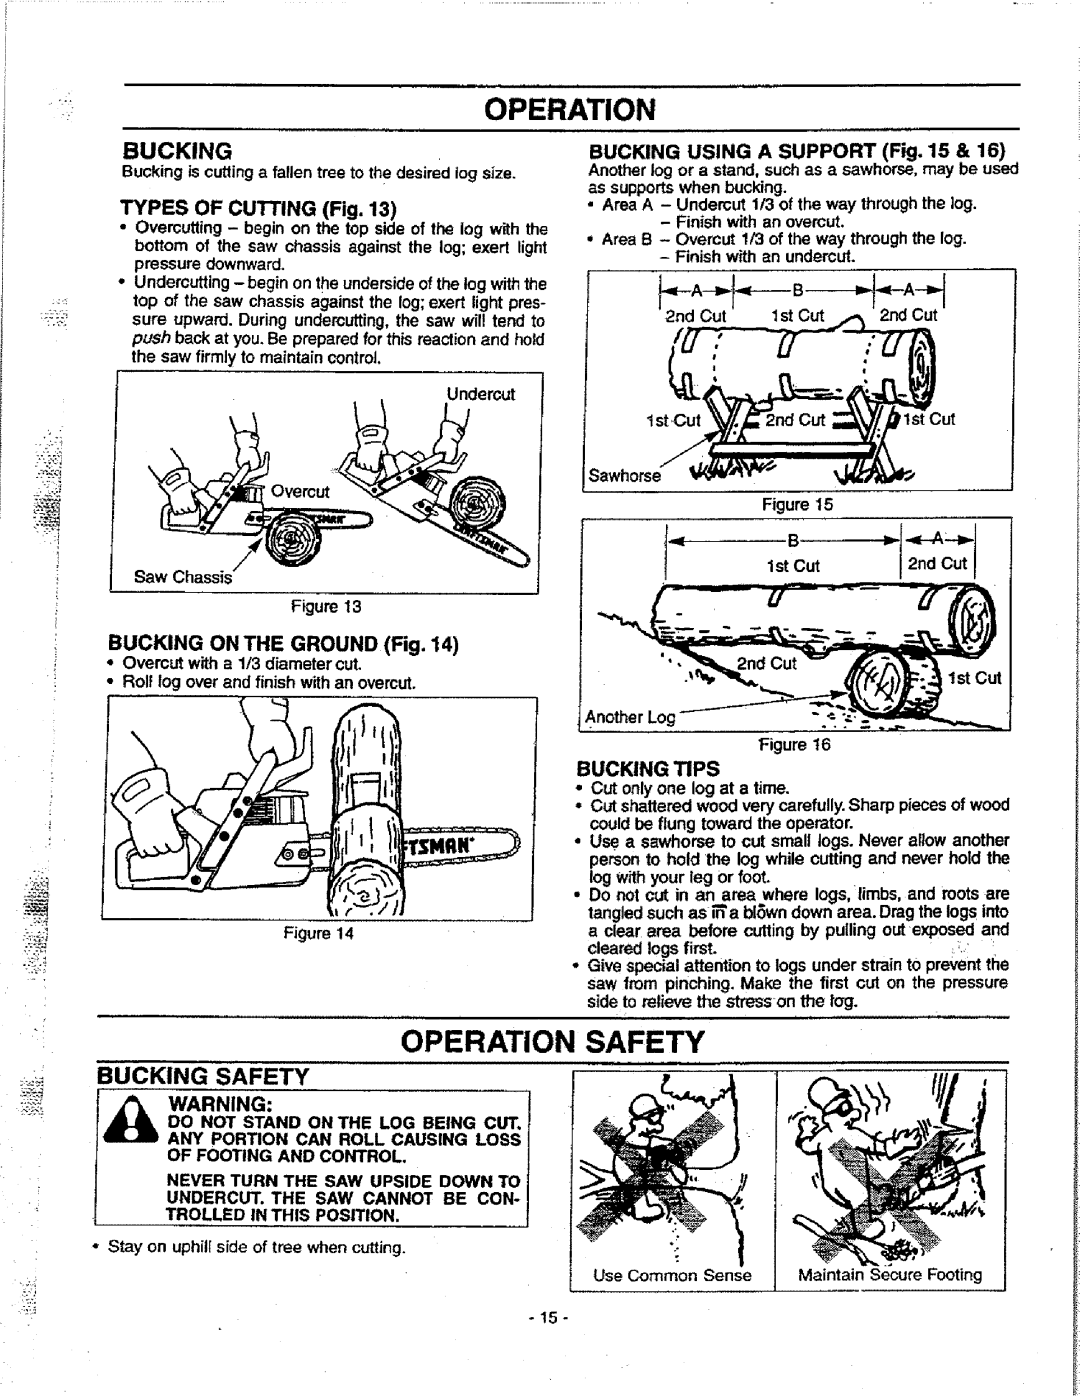 Craftsman 358.351080 Bucking Safety, TYPES OF CUTTING Fig, BUCKING ON THE GROUND Fig, Bucking Tips, 2nd Cut, Operation 